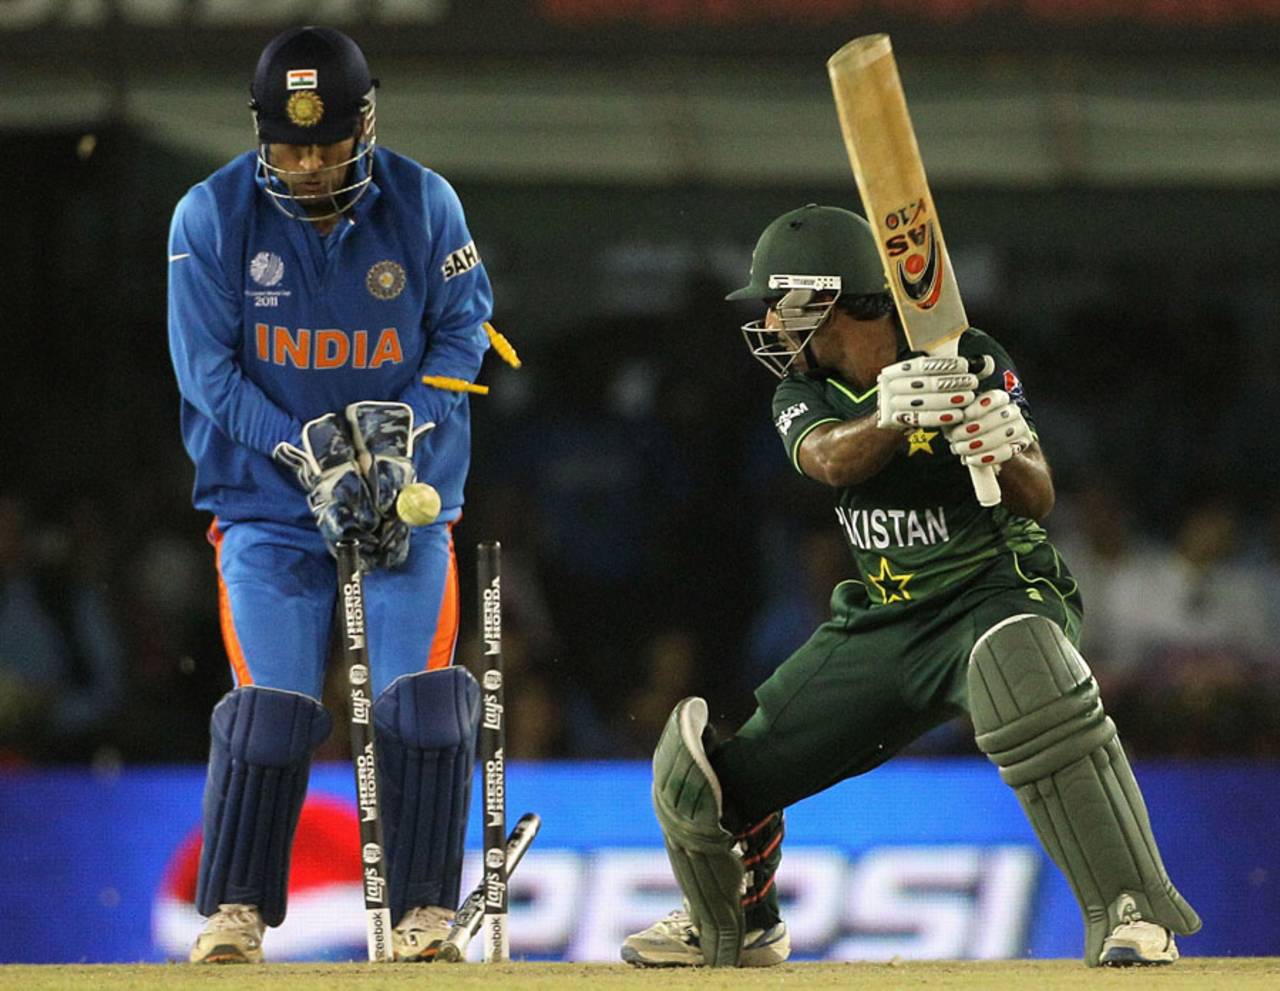 MS Dhoni watches as Asad Shafiq's middle stump is pegged back by Yuvraj Singh, India v Pakistan, 2nd semi-final, World Cup 2011, Mohali, March 30, 2011